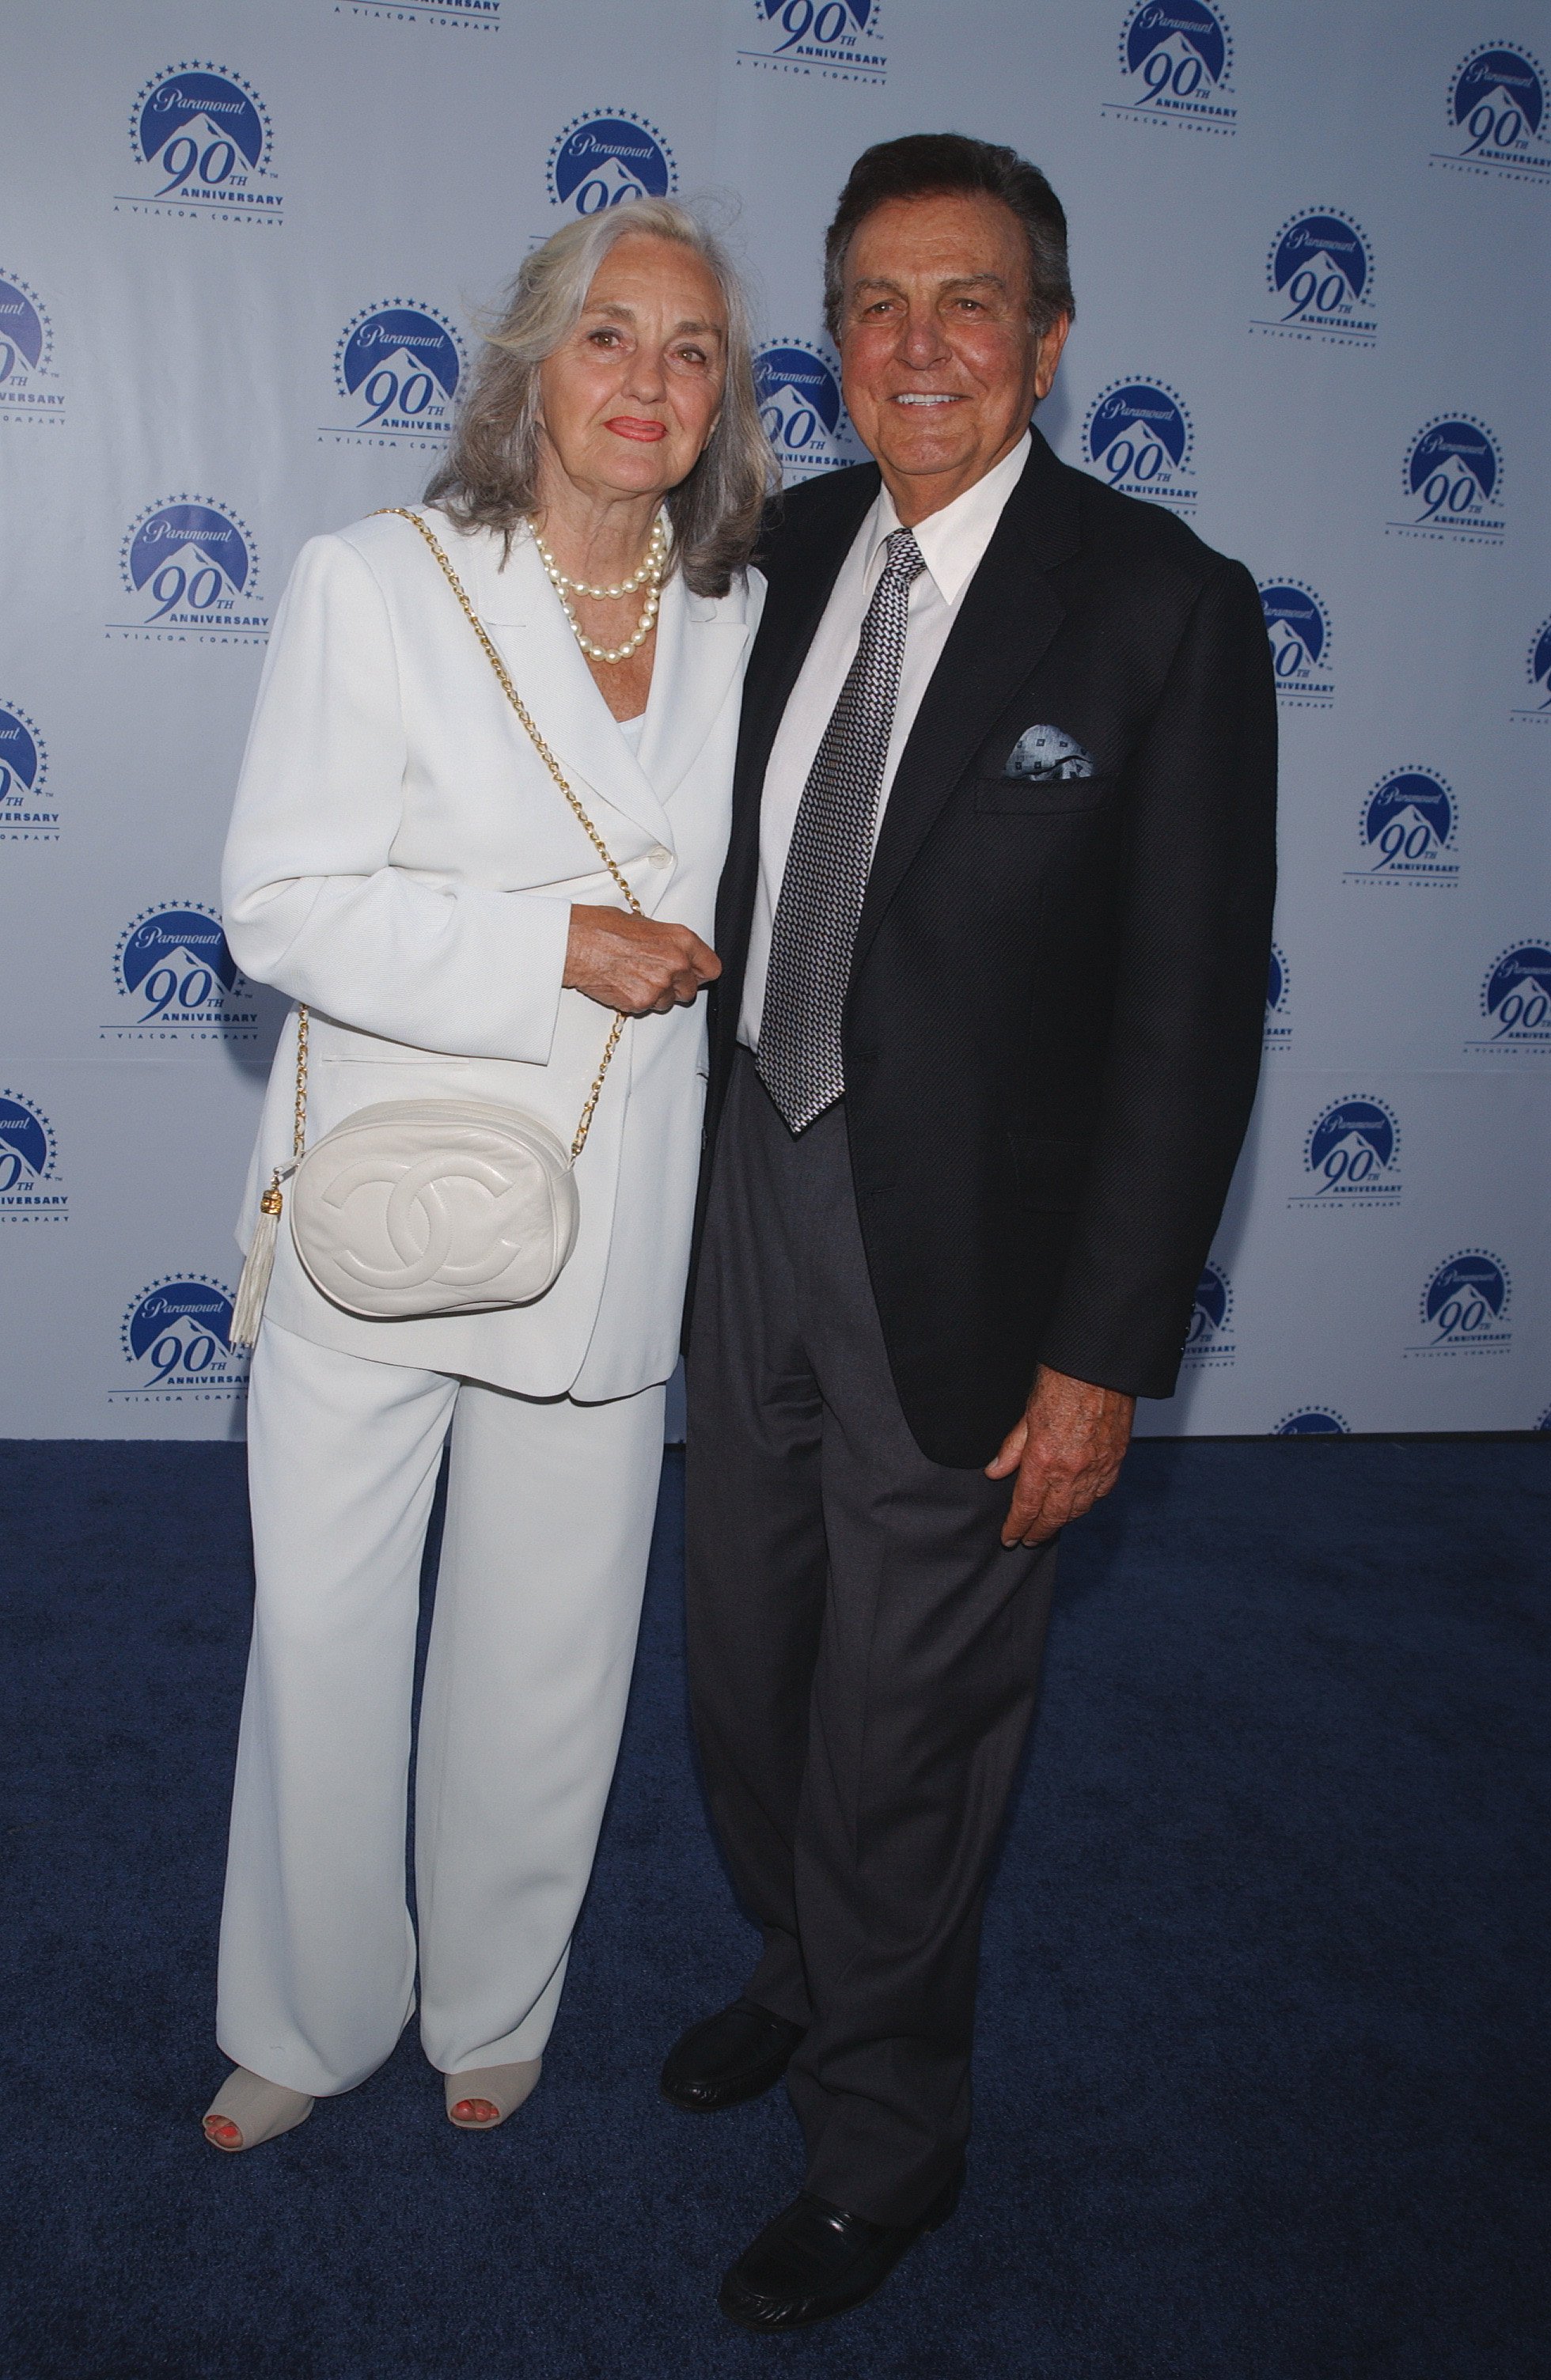 Actor Mike Connors and his wife Mary Lou arrive at the Paramount Pictures 90th anniversary party July 14, 2002. |  Source: Getty Images